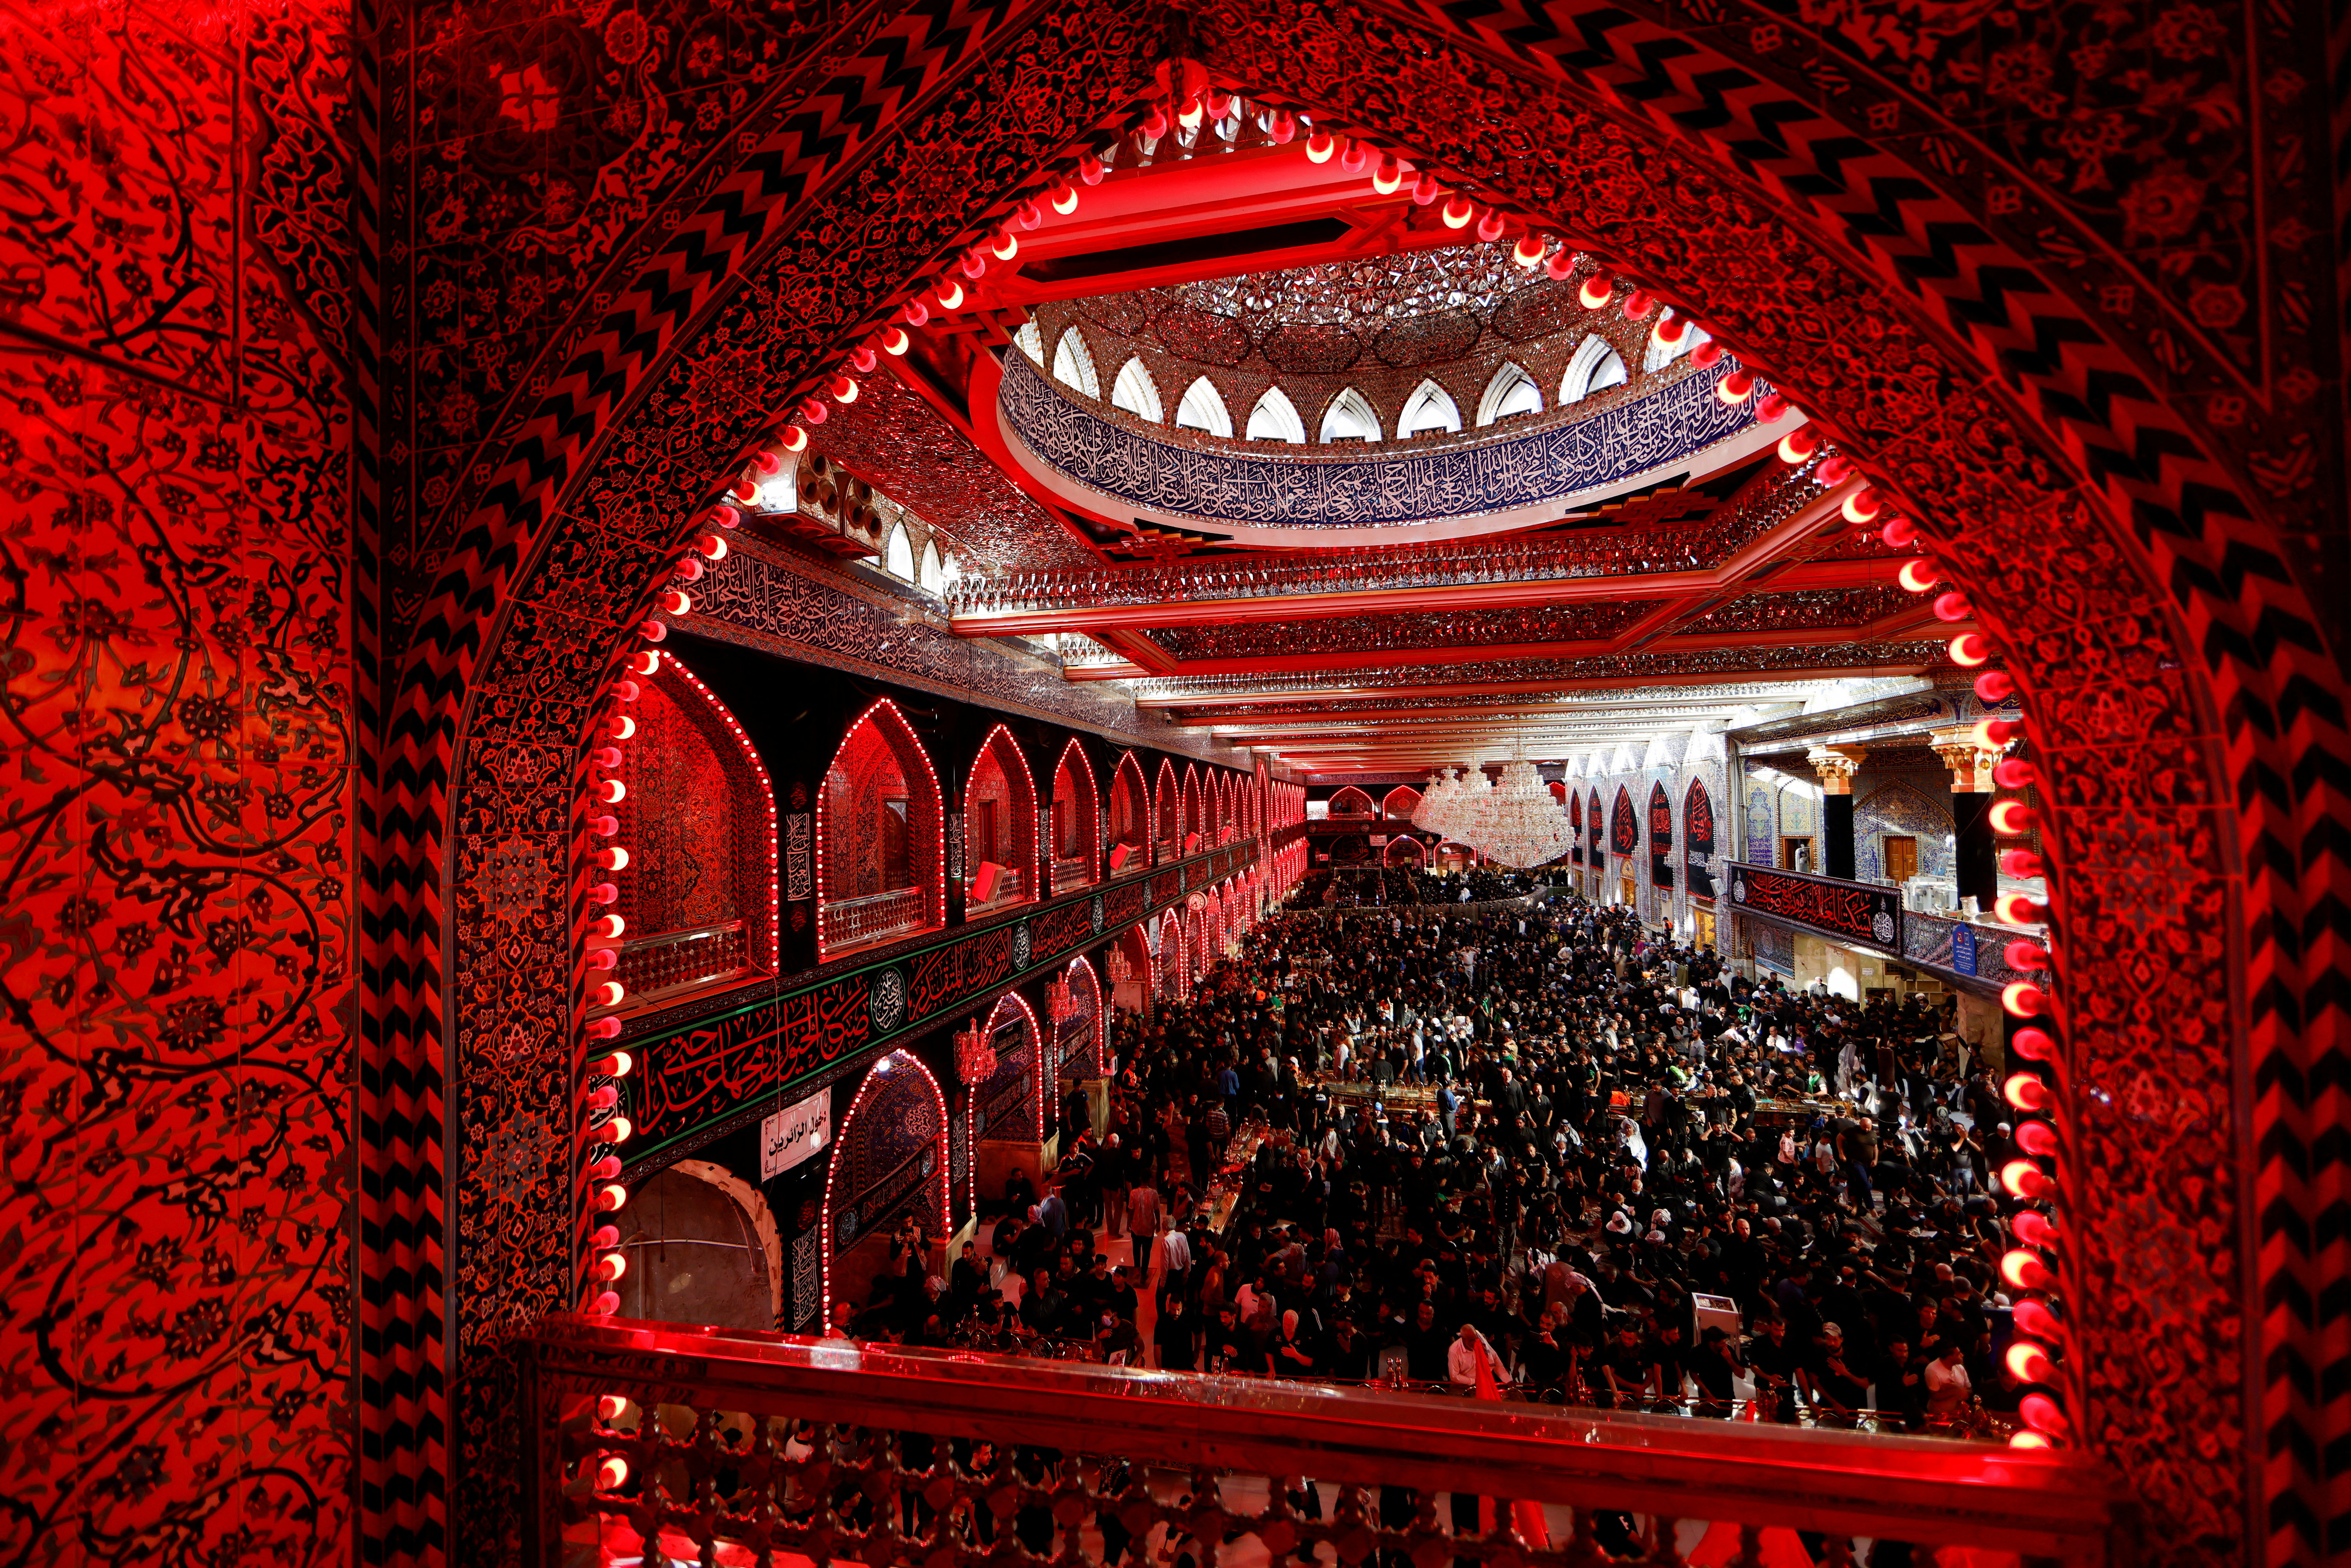 Shi'ite Muslim pilgrims take part in a mourning ceremony, ahead of the holy Shi'ite ritual of Arbaeen, in Kerbala